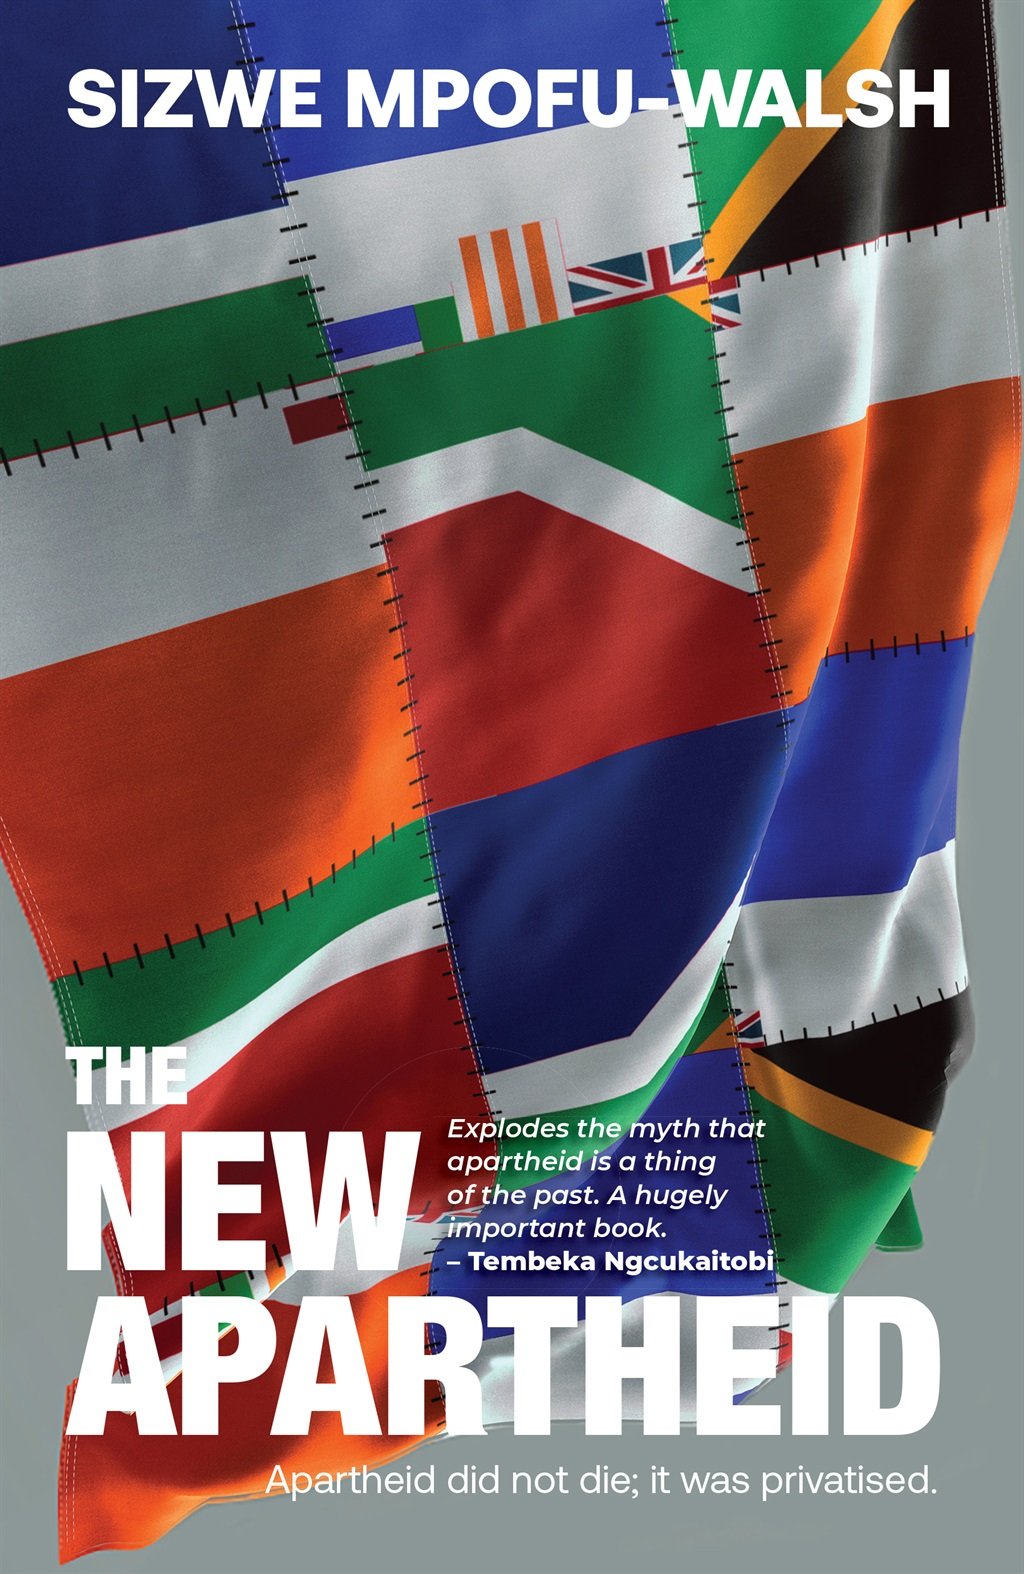 The cover of 'The New Apartheid' (Supplied)